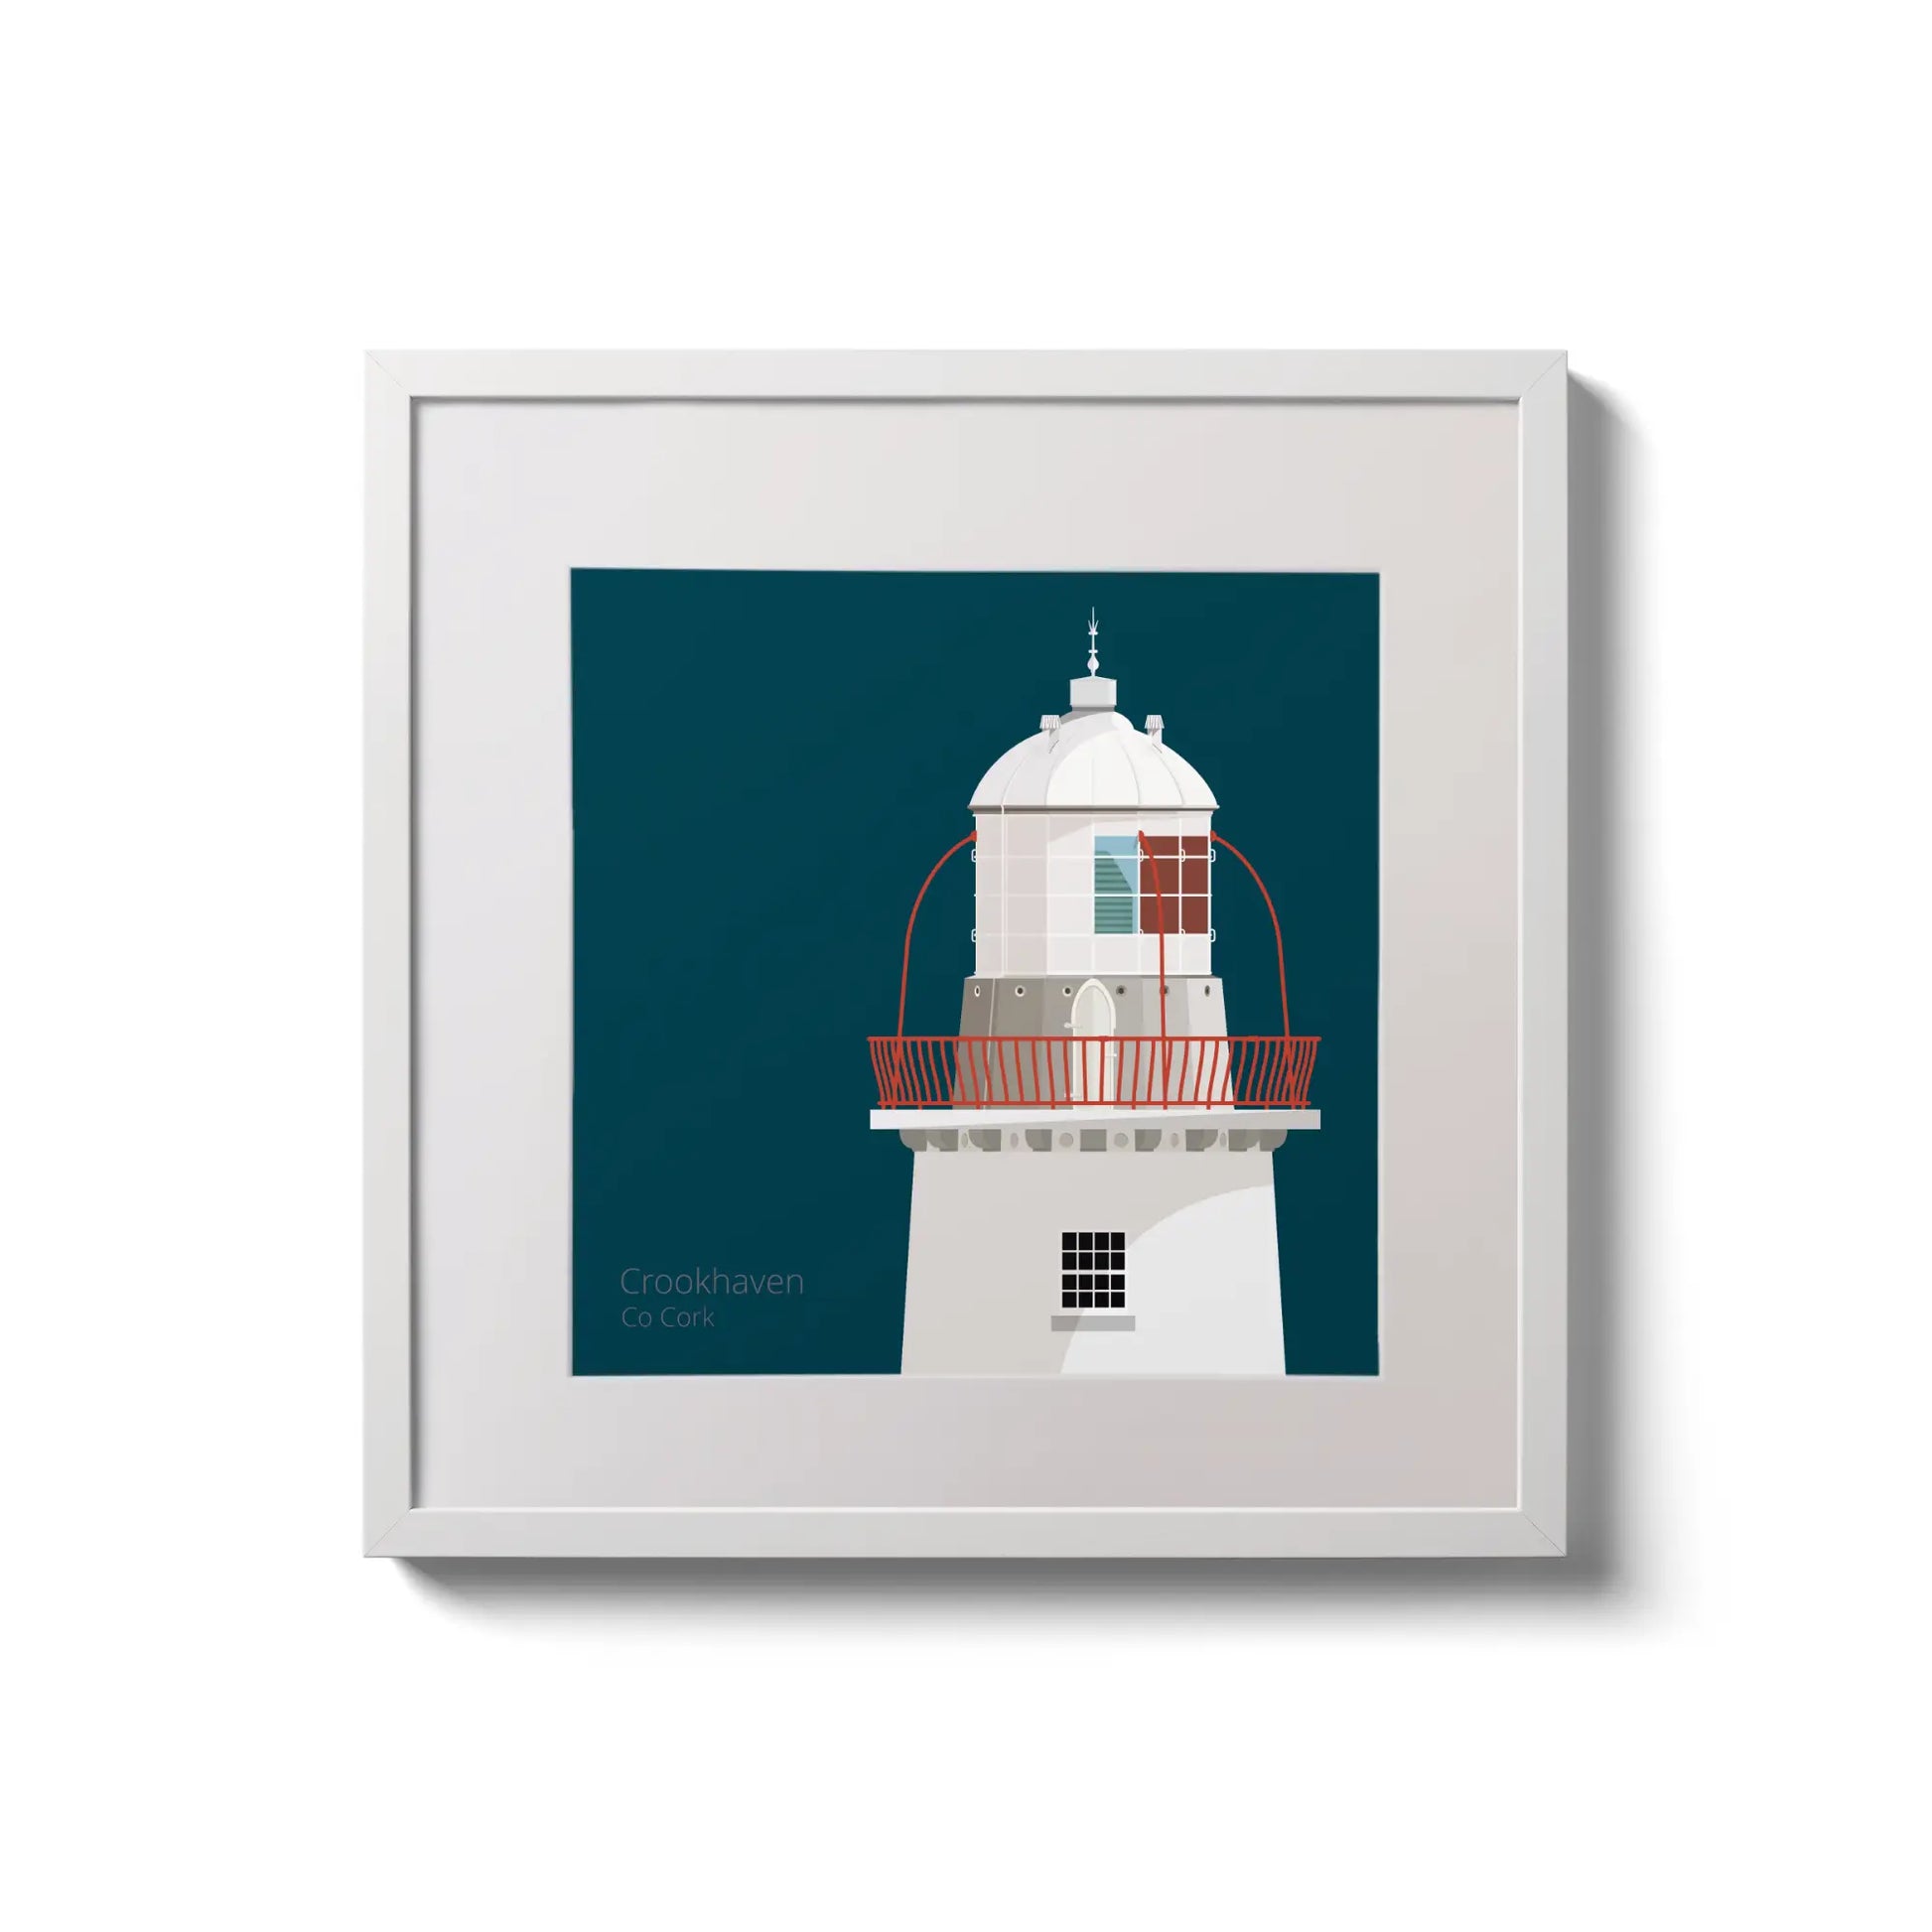 Illustration of Crookhaven lighthouse on a midnight blue background,  in a white square frame measuring 20x20cm.